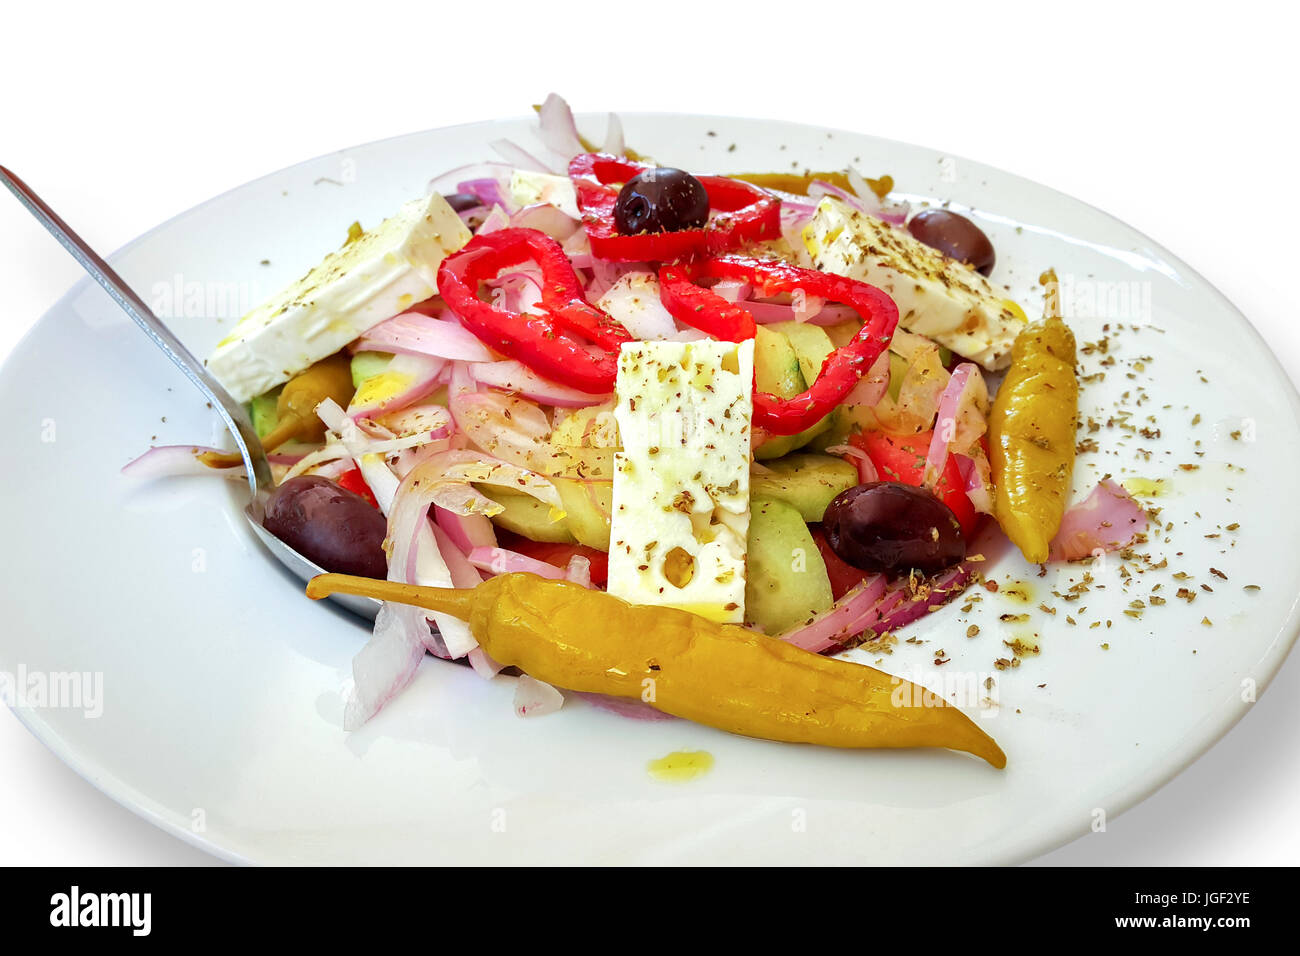 Fresh vegetable Greek salad with tomatoes, cucumbers, peppers, onion, olives and white cheese. Stock Photo